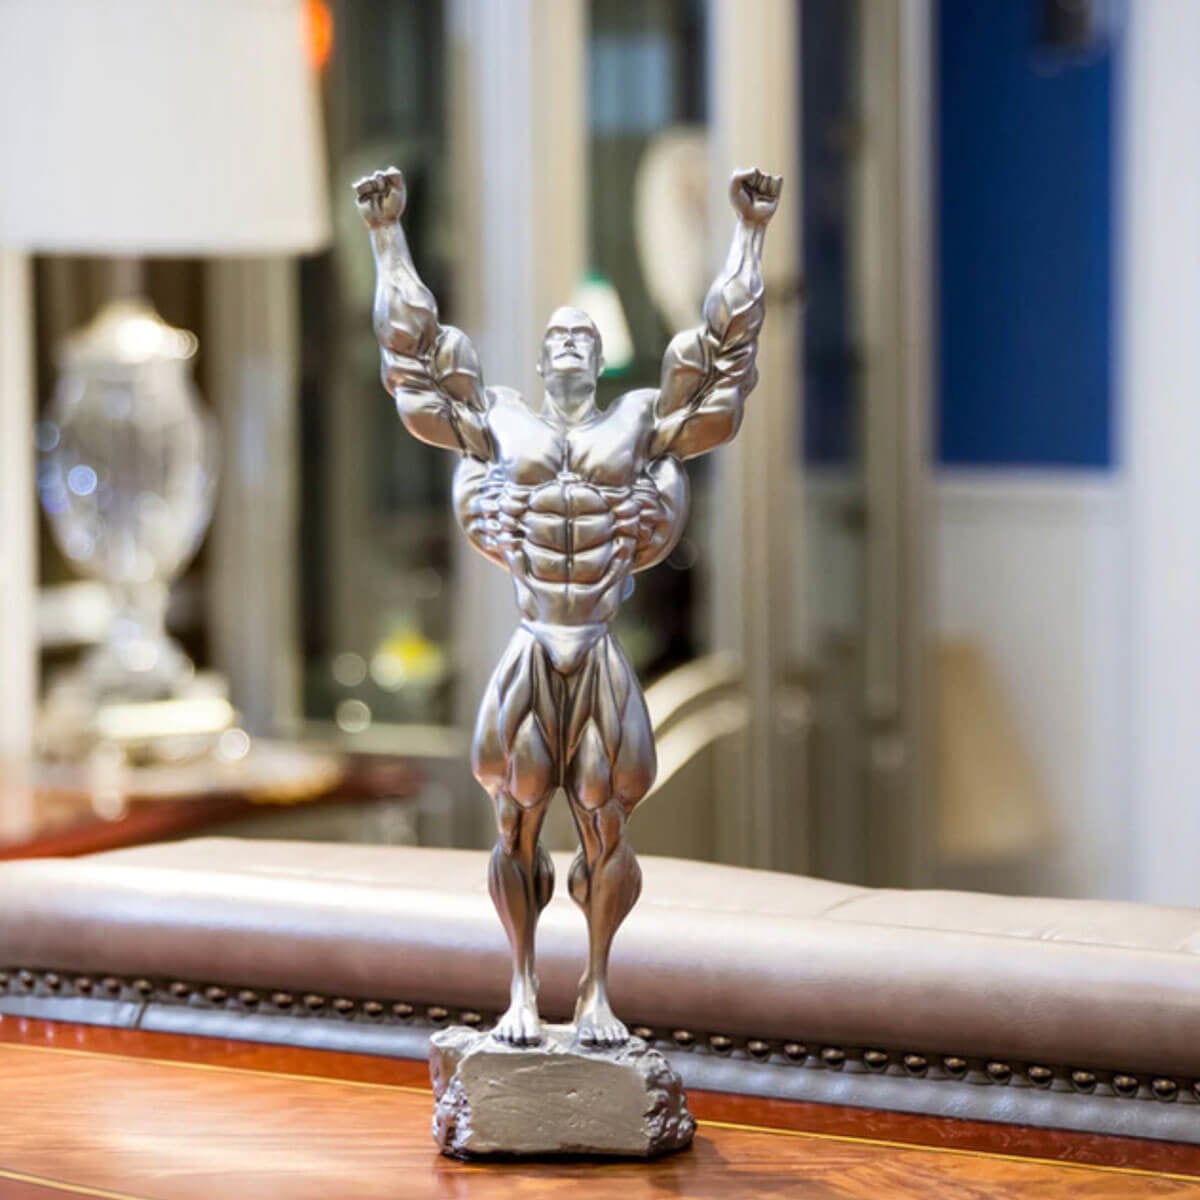 The Fitness Muscle Bodybuilding Sports Trophies Sculpture